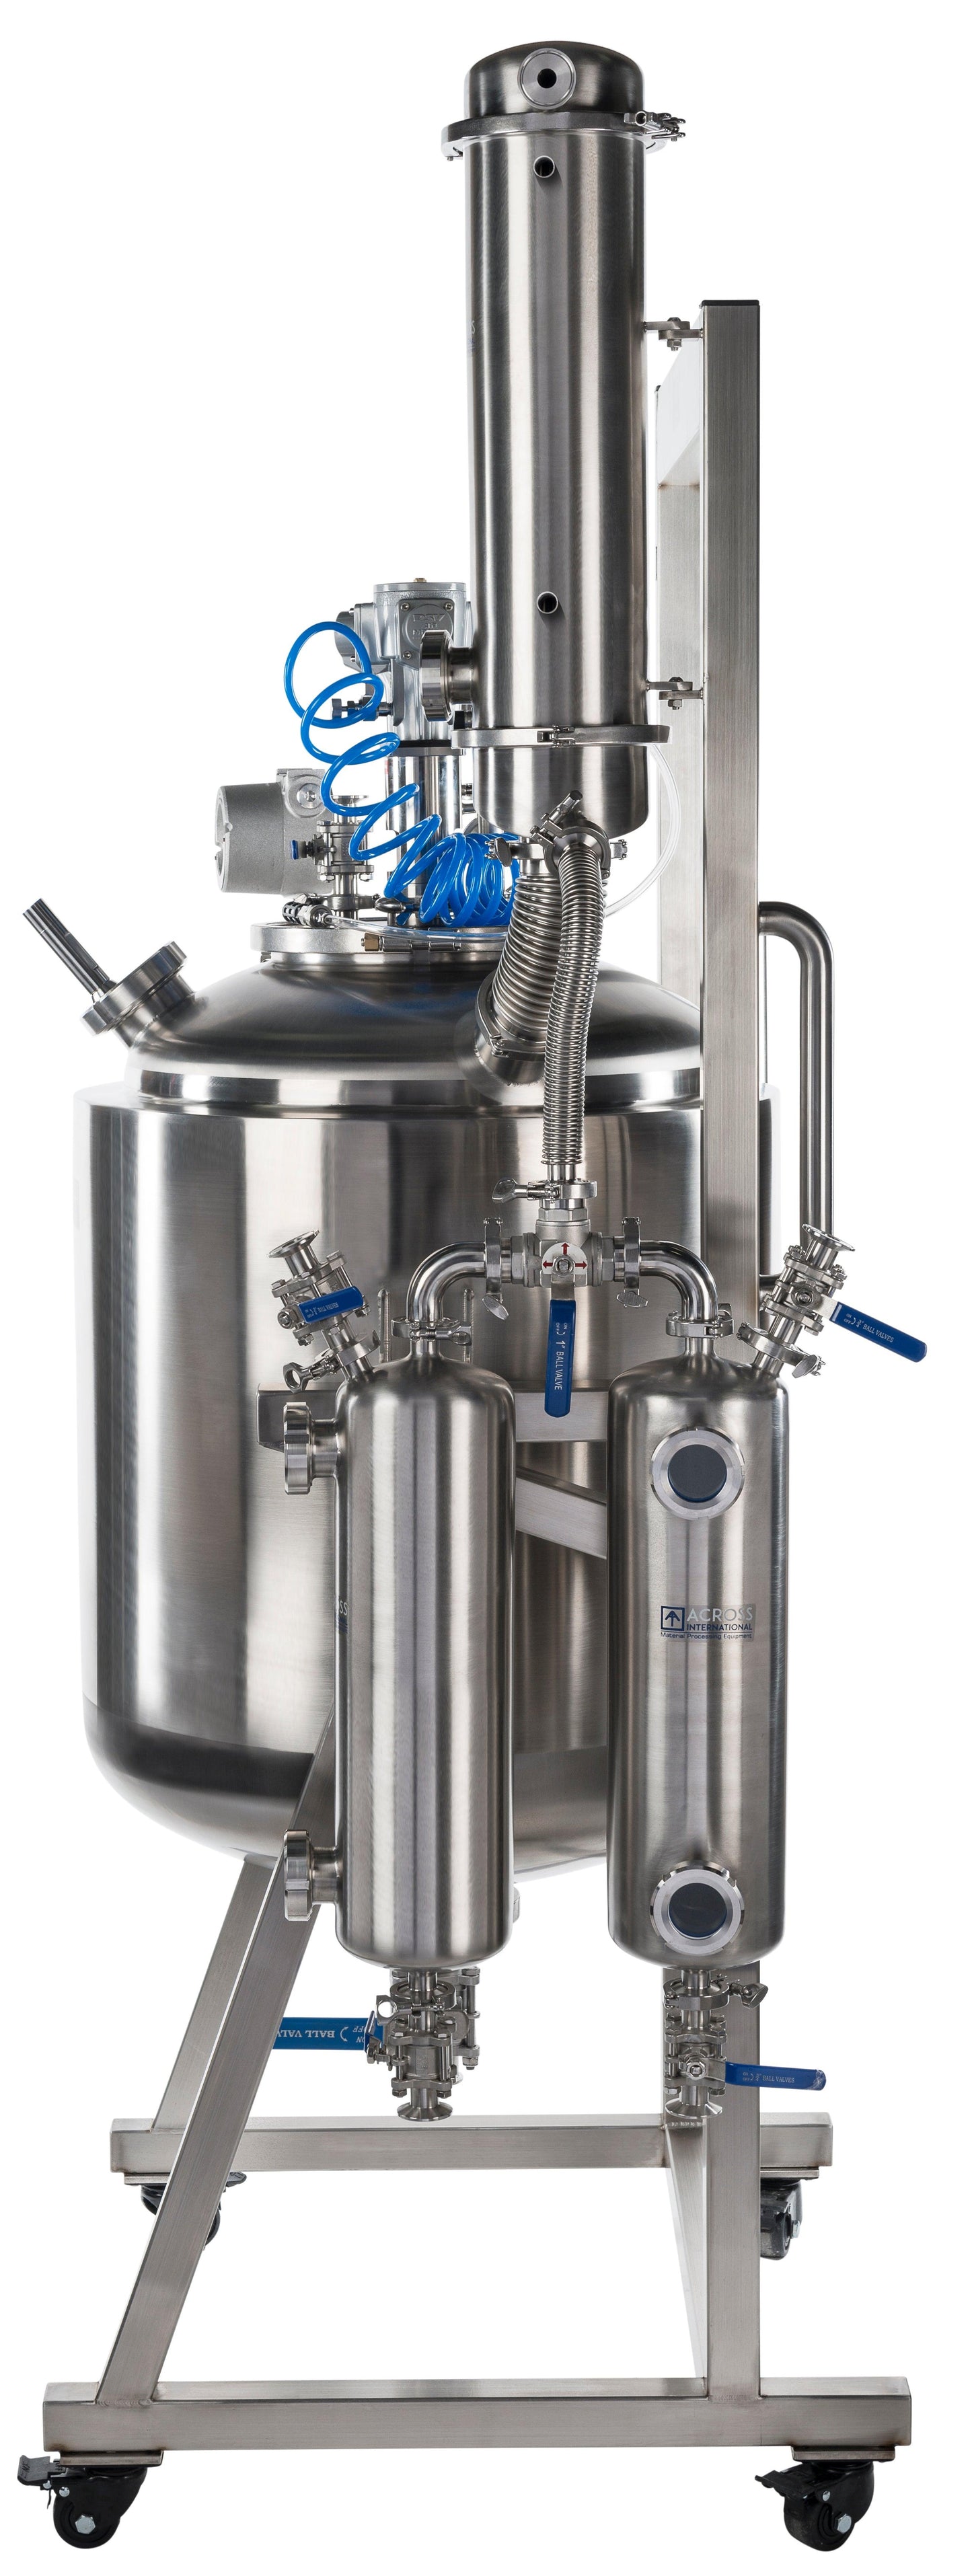 Dual-Jacketed 200L 316L-Grade Stainless Steel Reactor